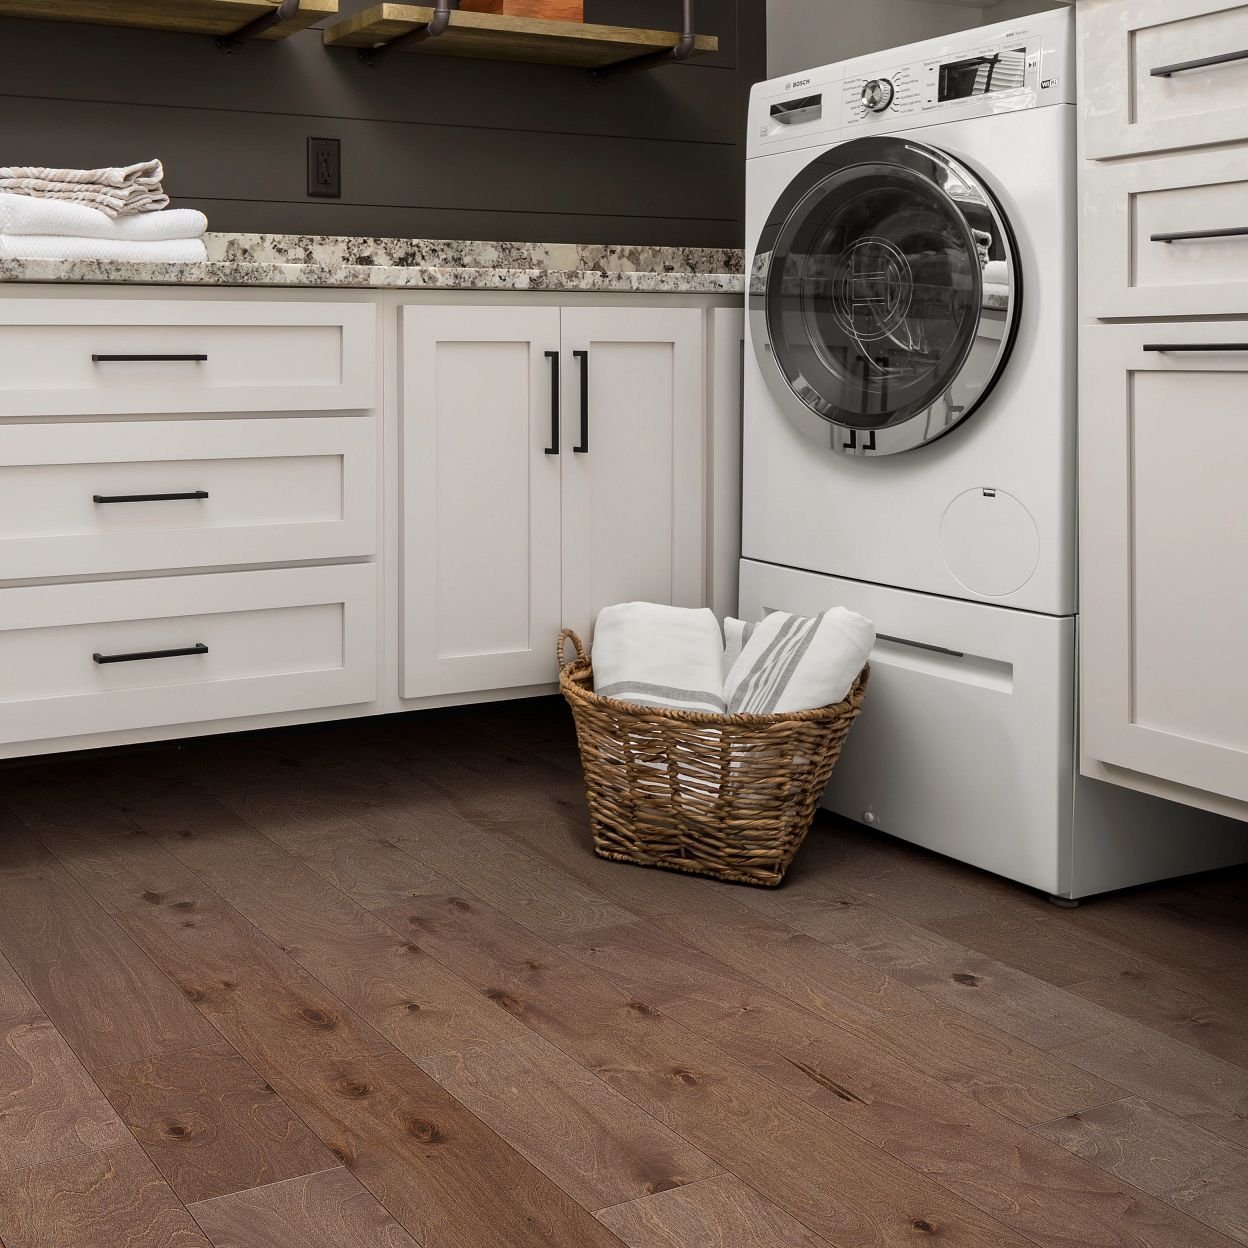 Laundry room from Coastal Floor Covering Inc in Crowley